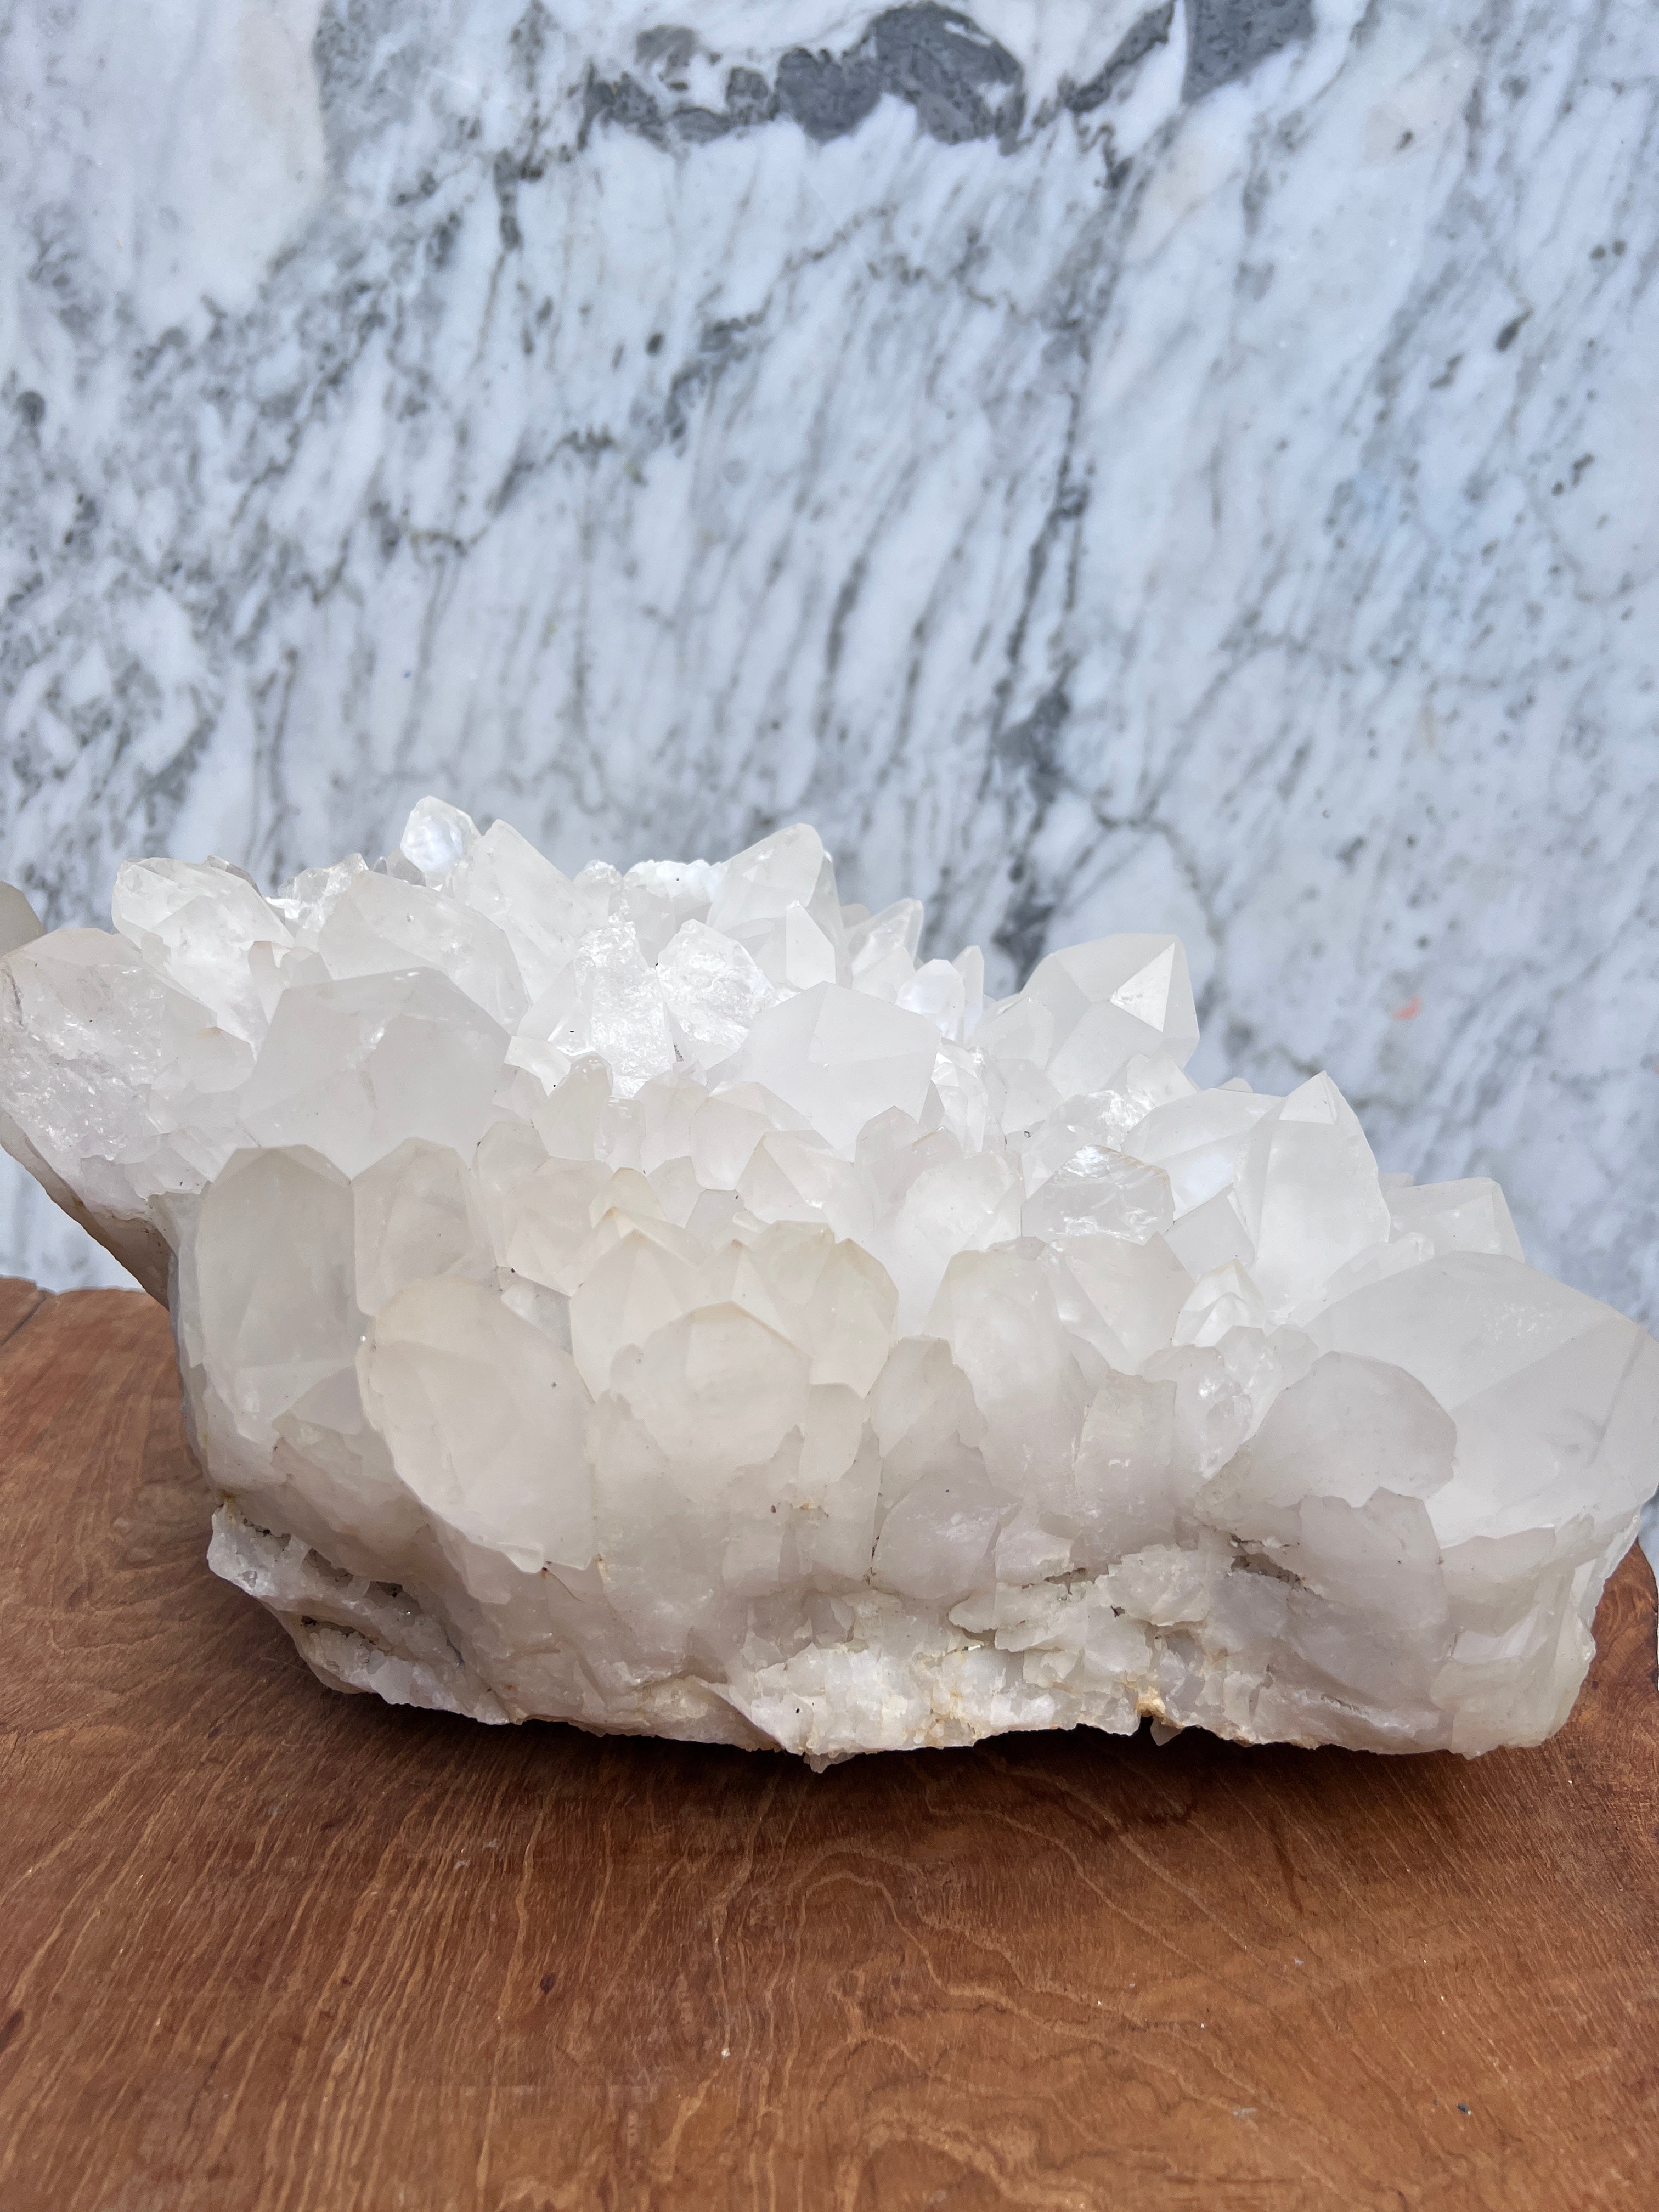 Not specified Crystals Snow Snow Quartz Cluster